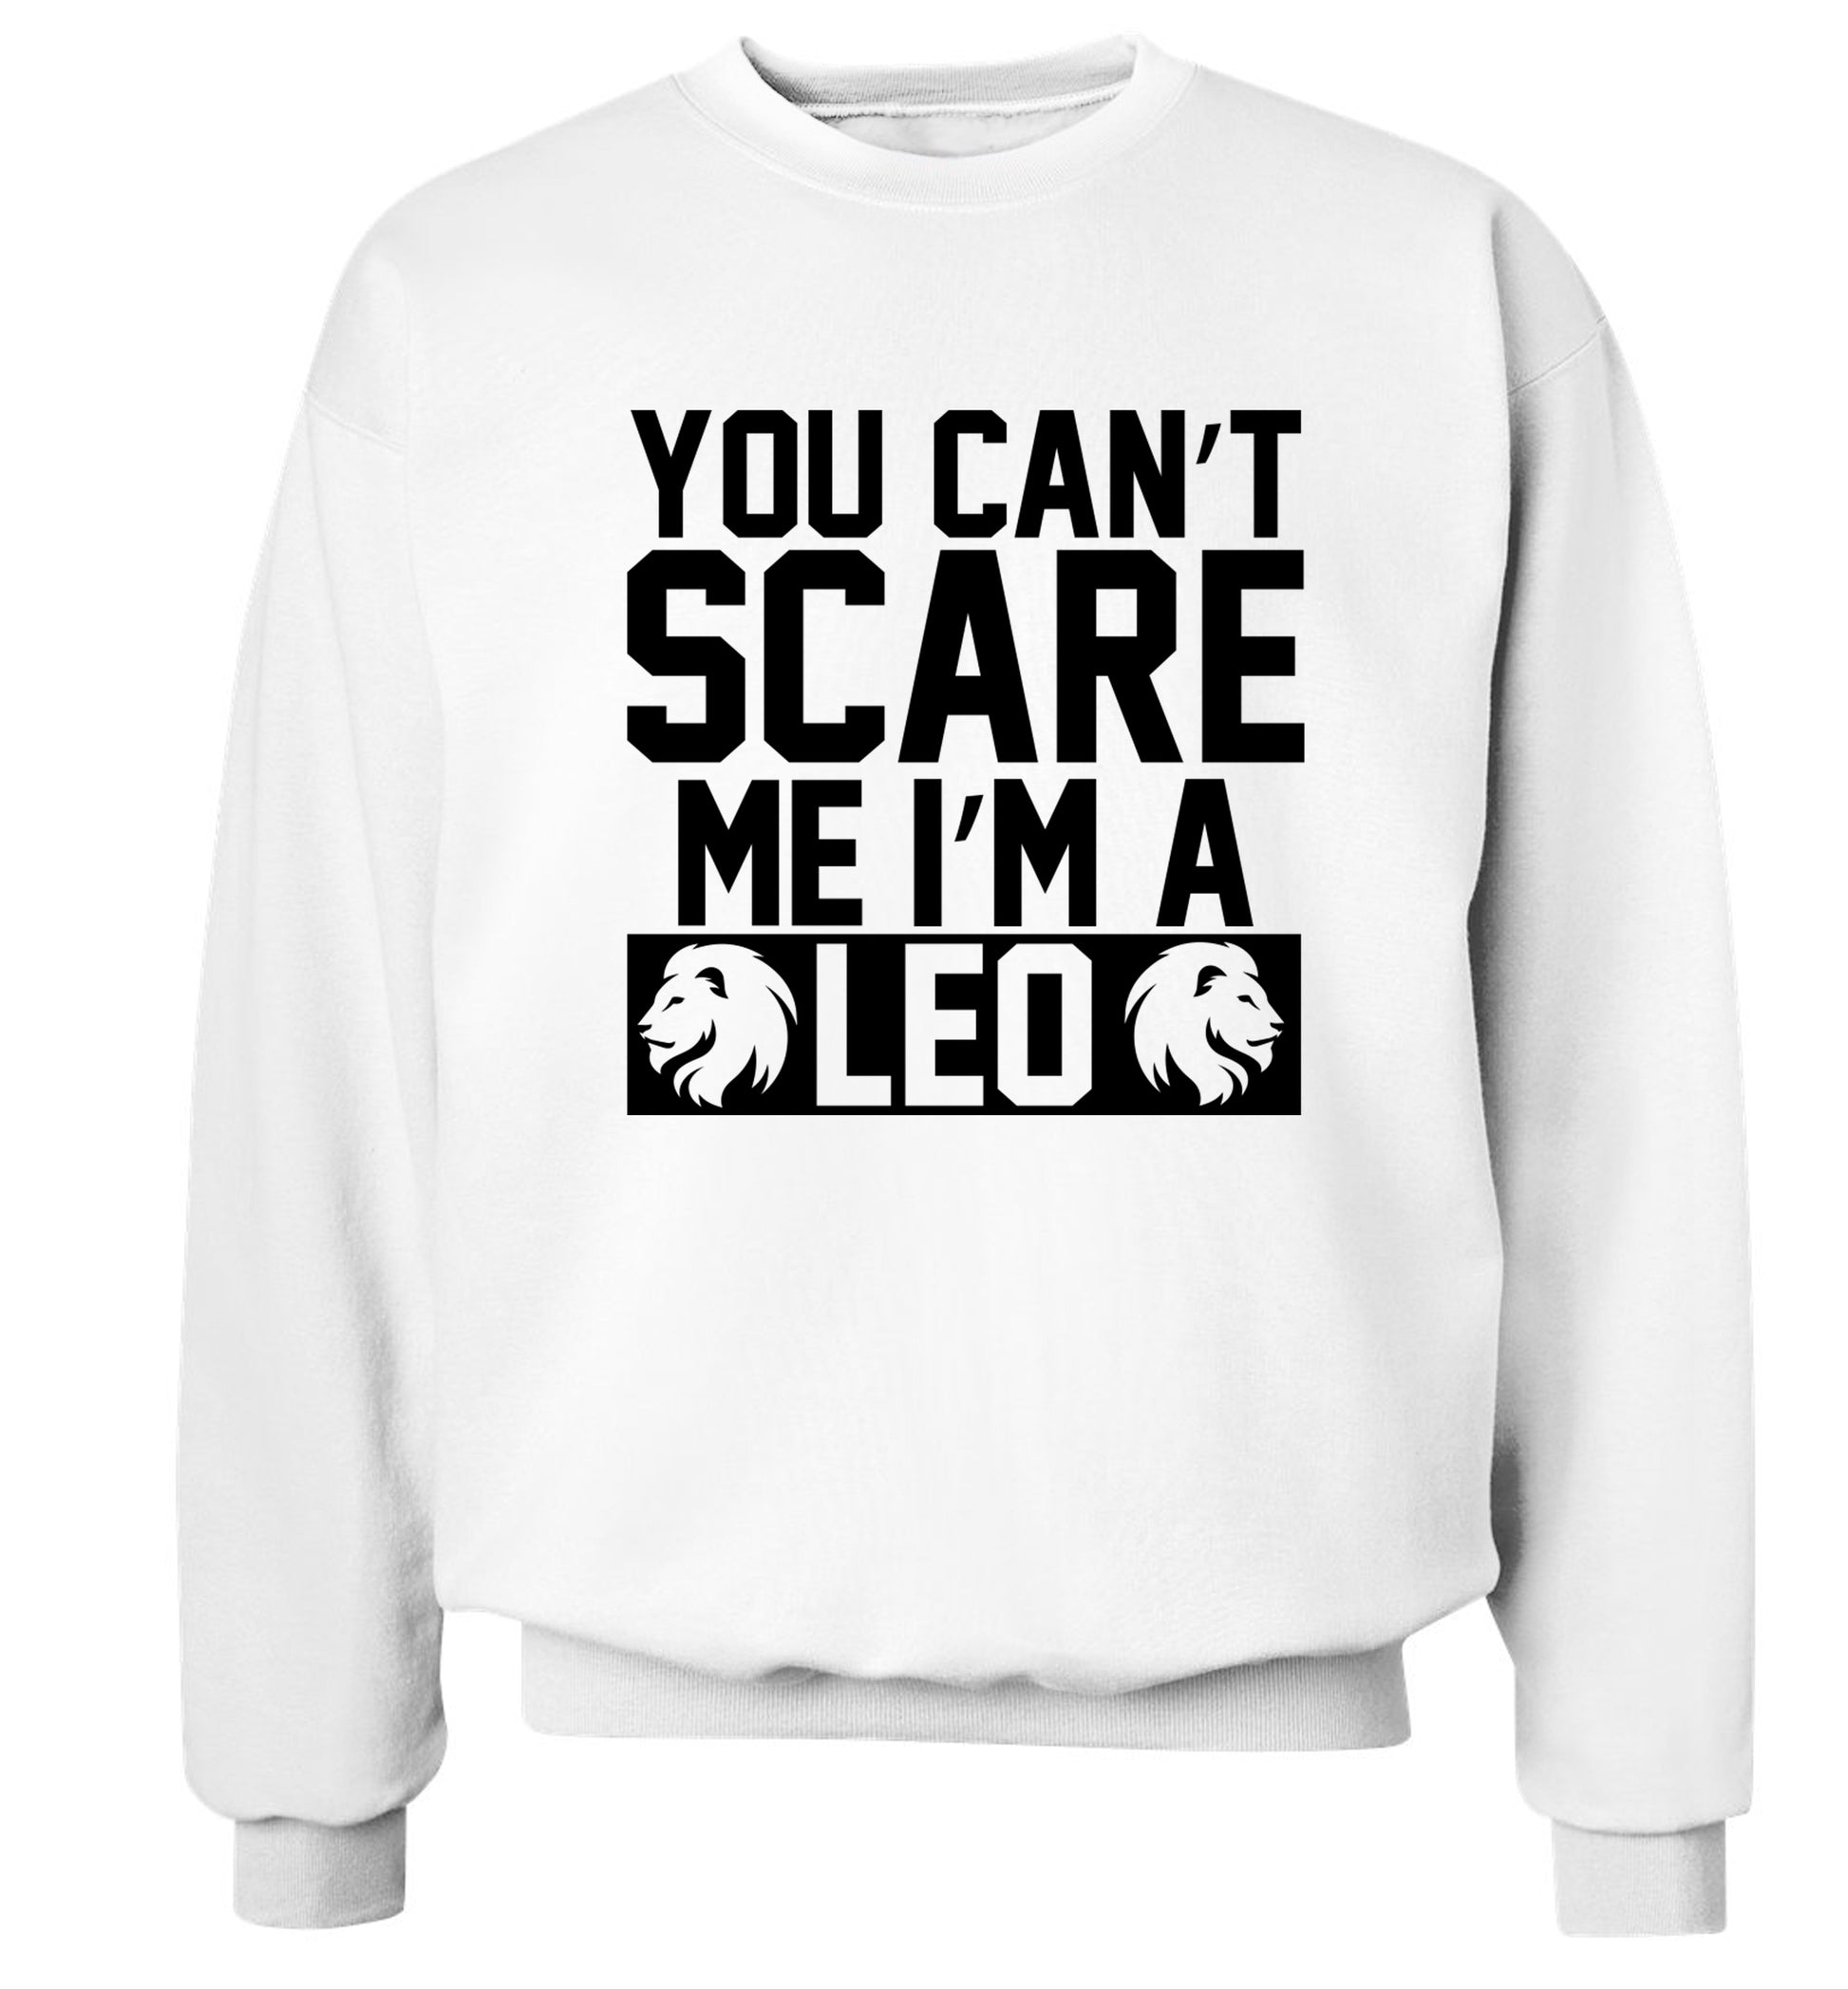 You can't scare me I'm a leo Adult's unisex white Sweater 2XL